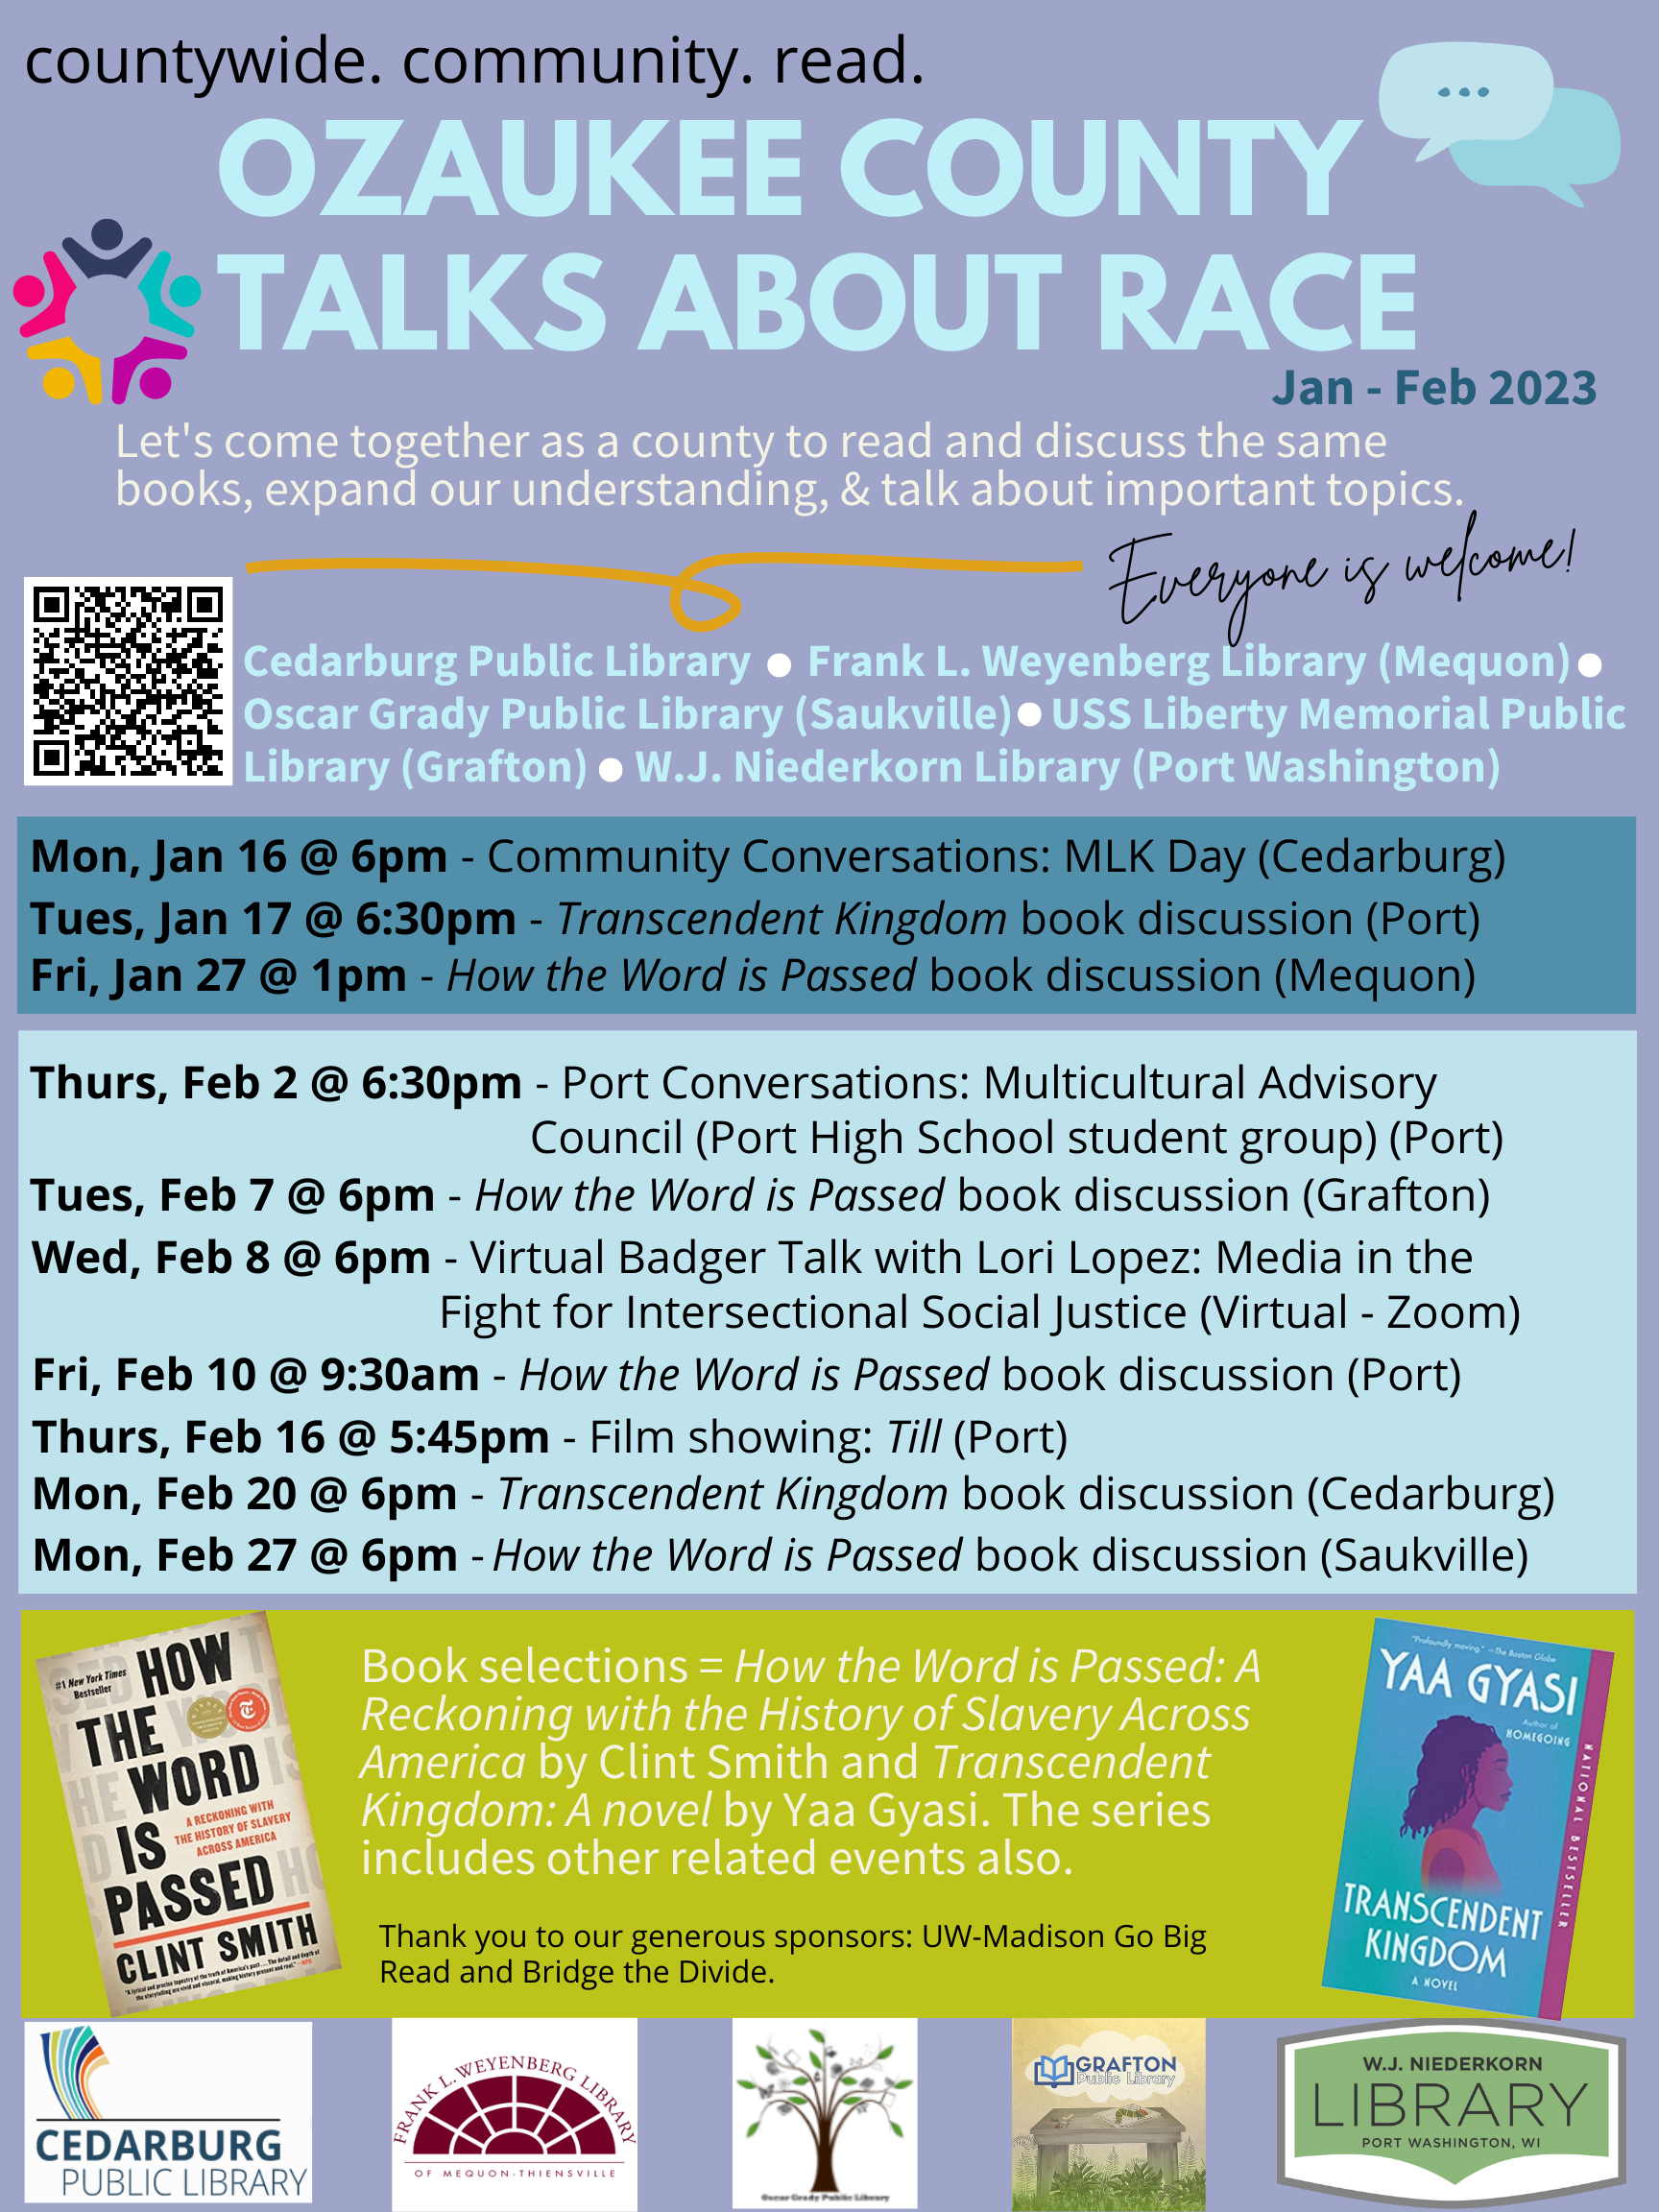 General flyer for Ozaukee County Talks About Race Series from Jan to Feb 2023